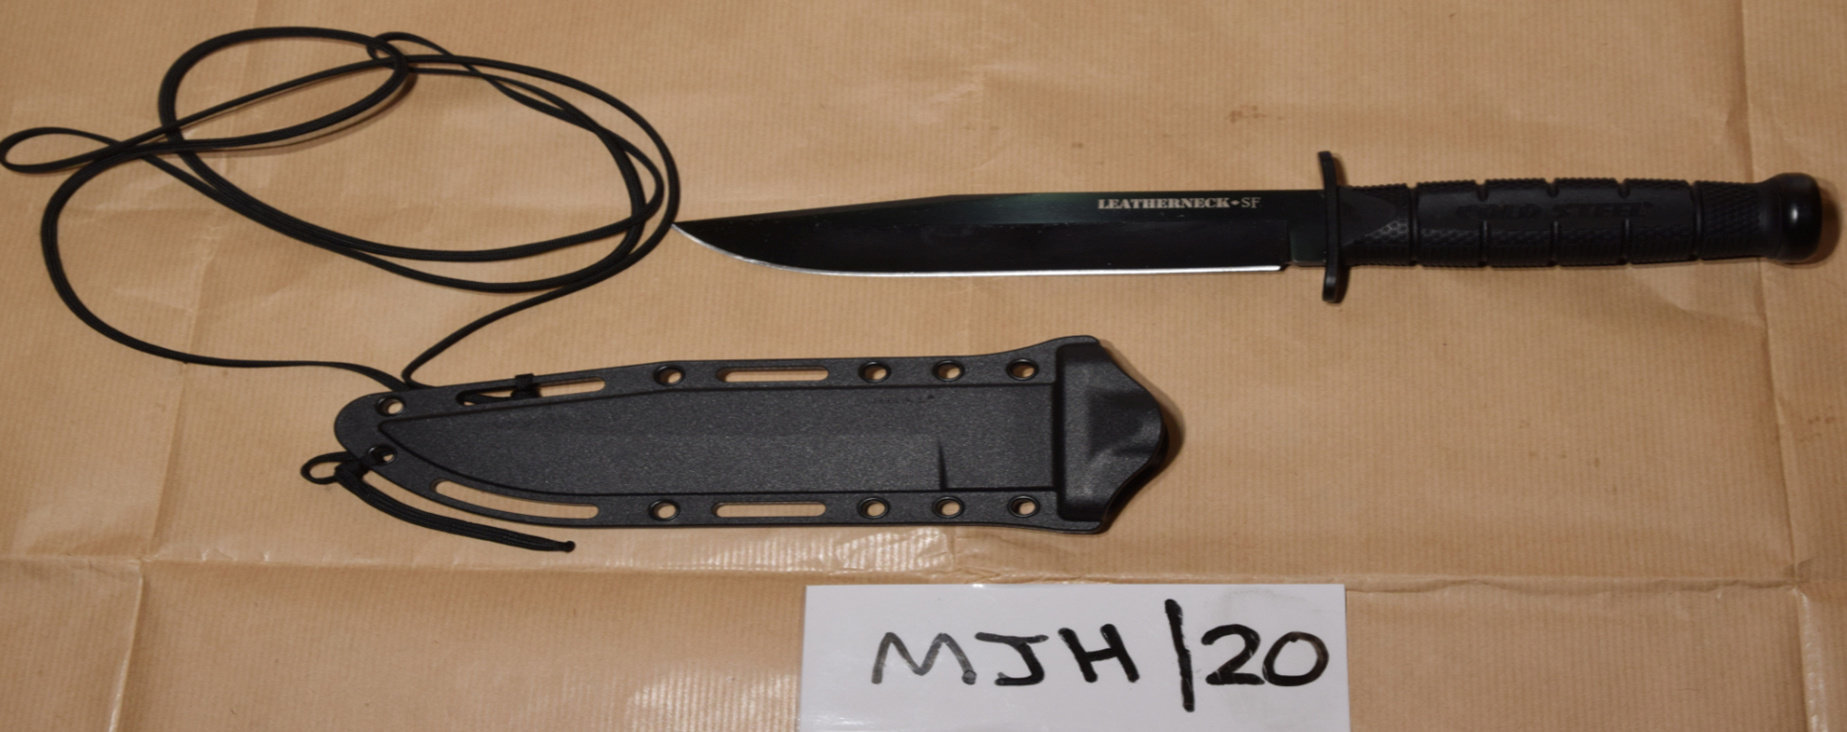 <strong>A knife presented as evidence in the terrorism trial of Madihah Taheer and Ummariyat Mirza at Woolwich Crown Court</strong>